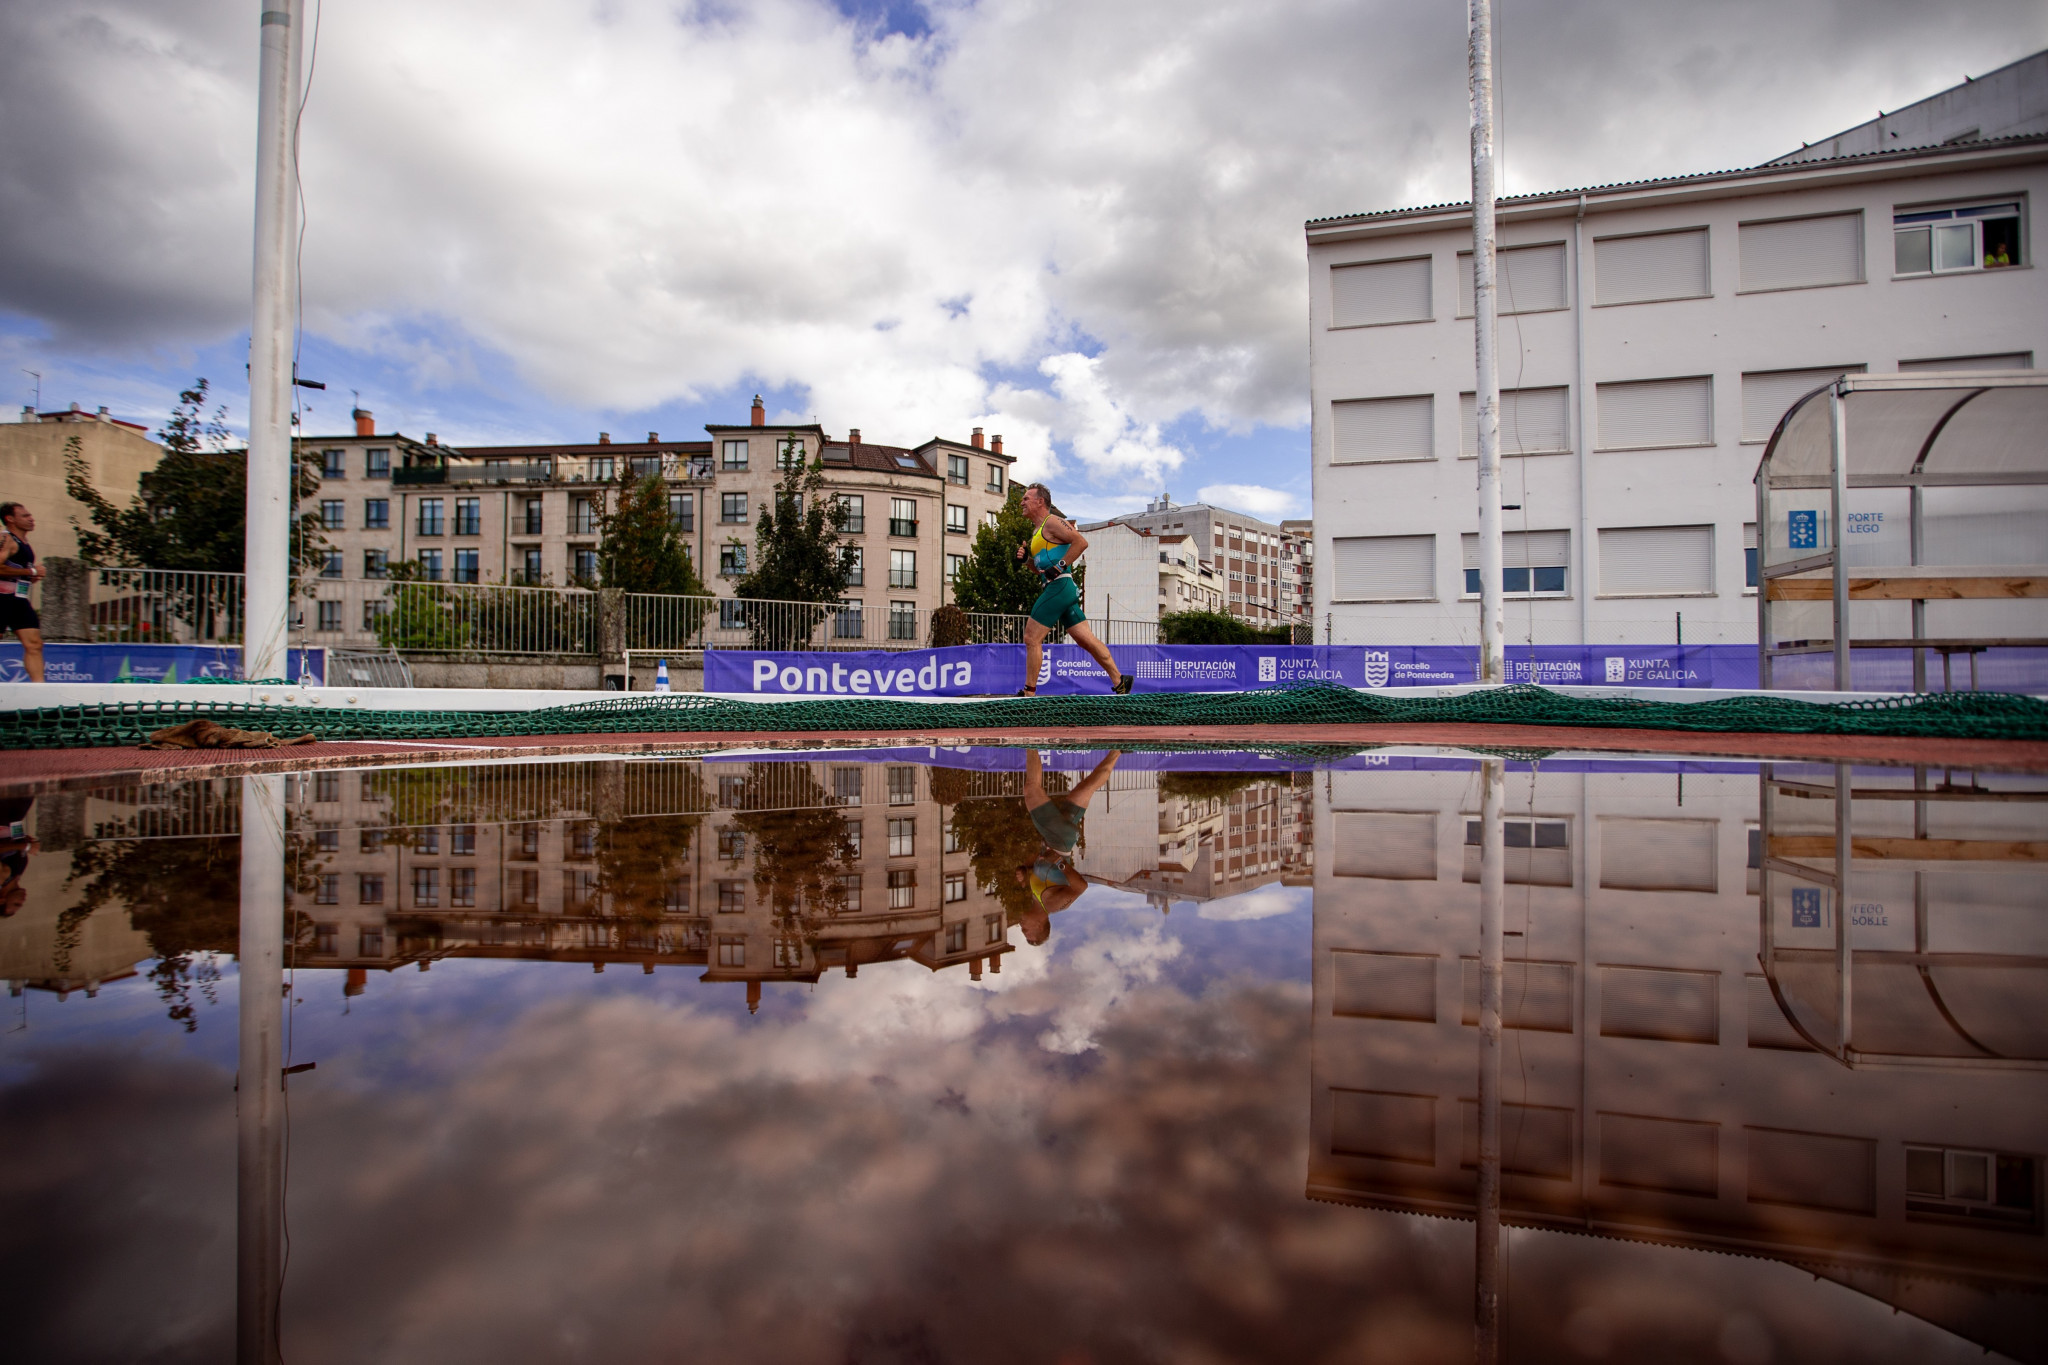 Weather was fair for most of the first day in Pontevedra, but there was a brief torrential downpour ©World Triathlon